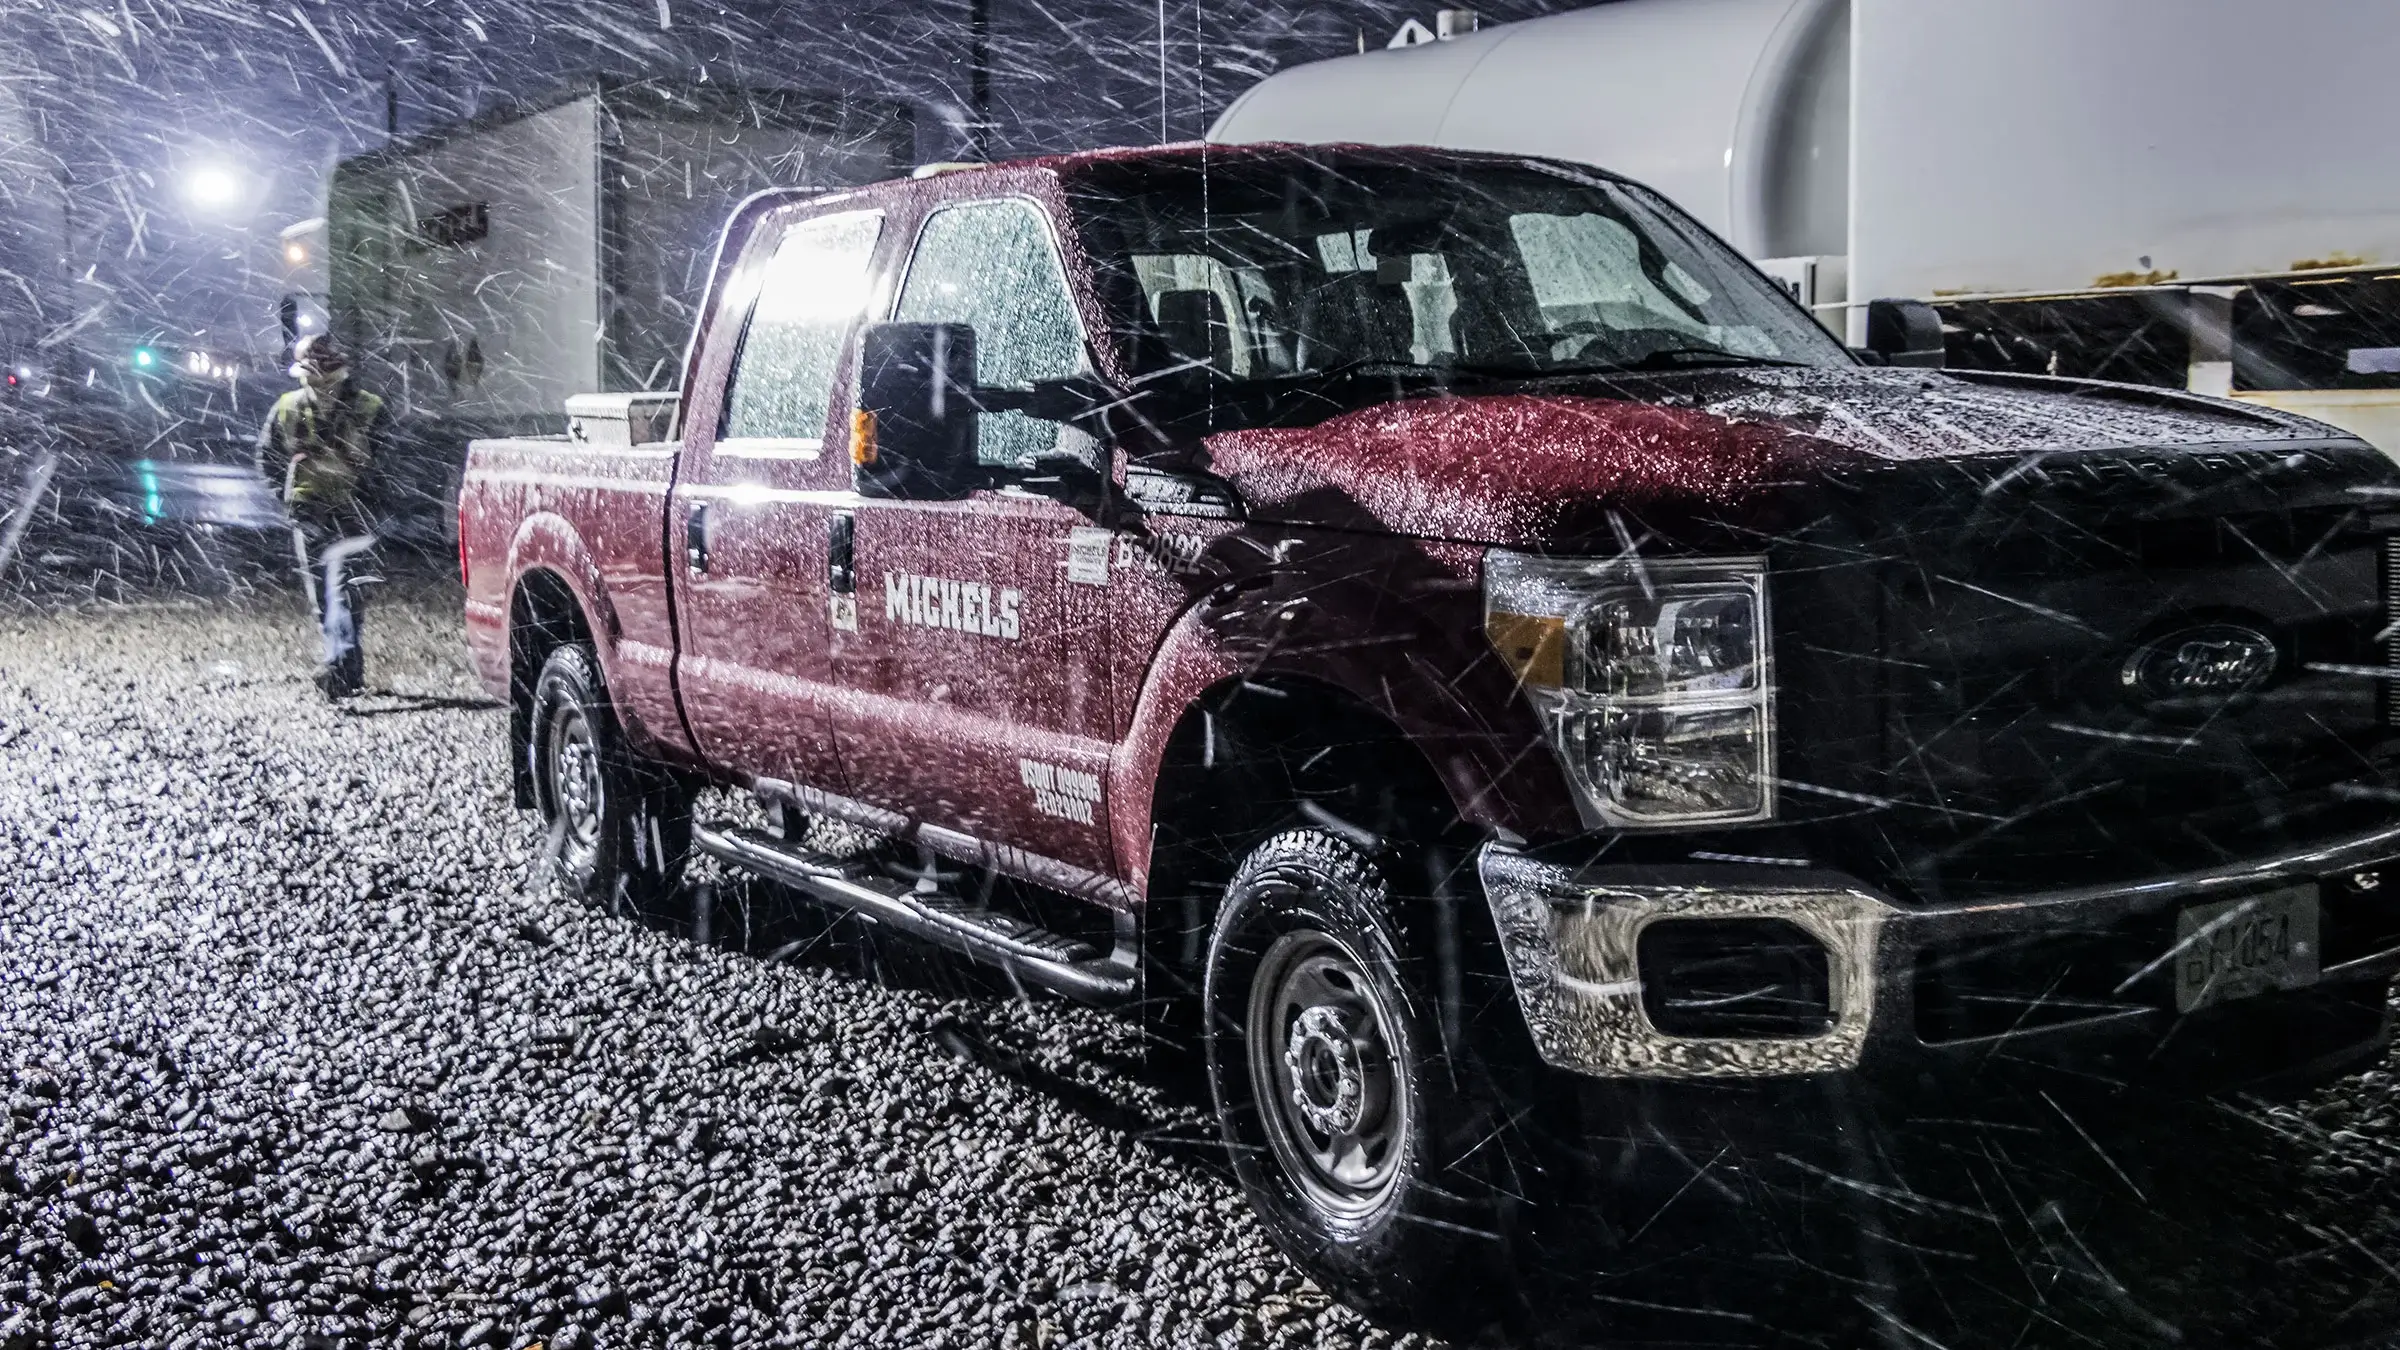 A pickup truck is parked on a construction site during a snowstorm